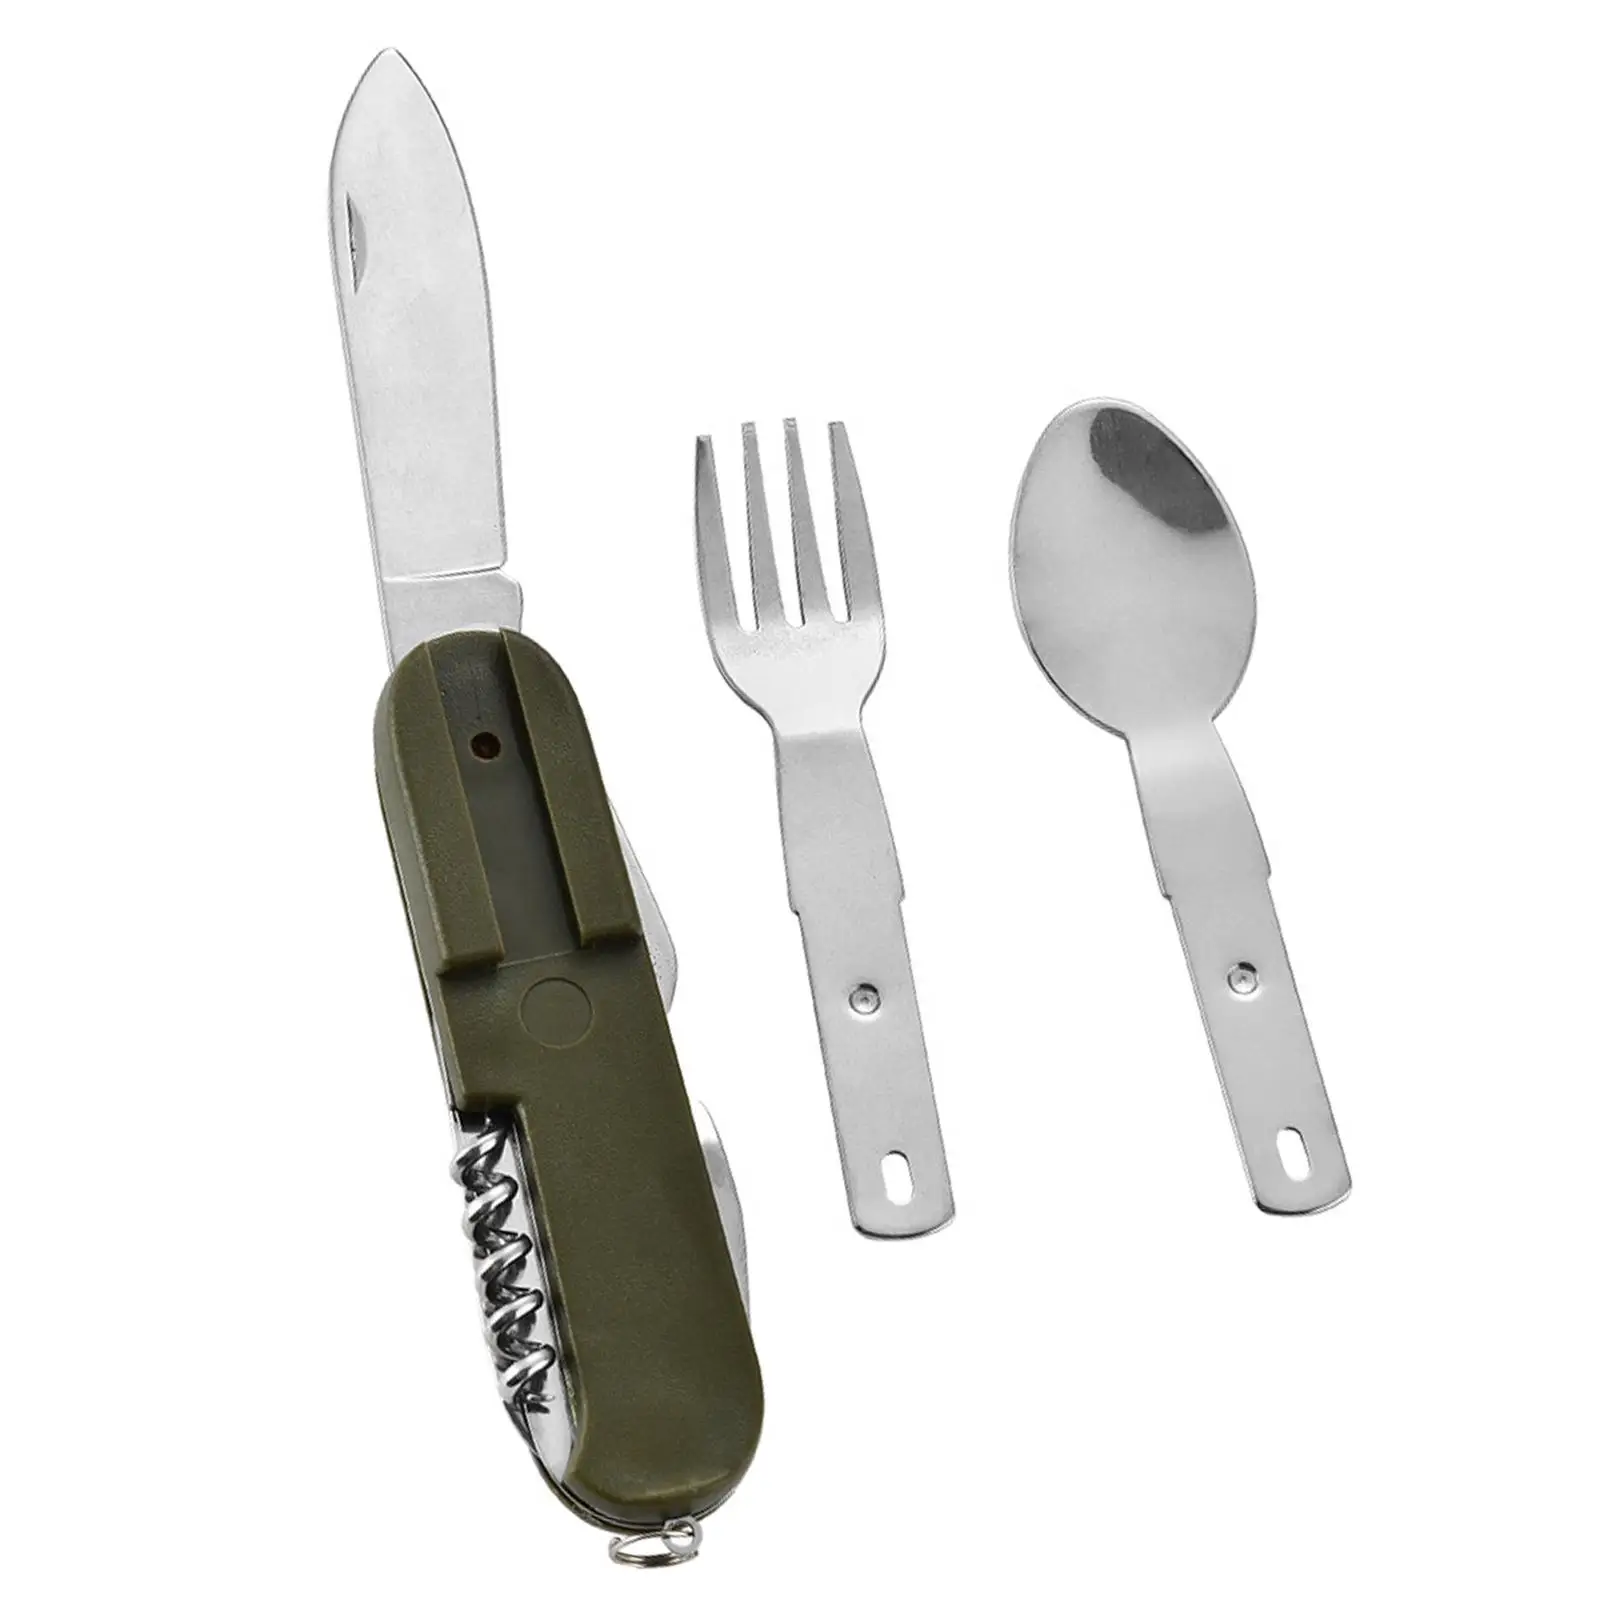 Camping Utensil Fork Knife Spoon Bottle Opener Flatware Multifunctional Compact Multi Tool for Outdoor Travel with Storage Bag